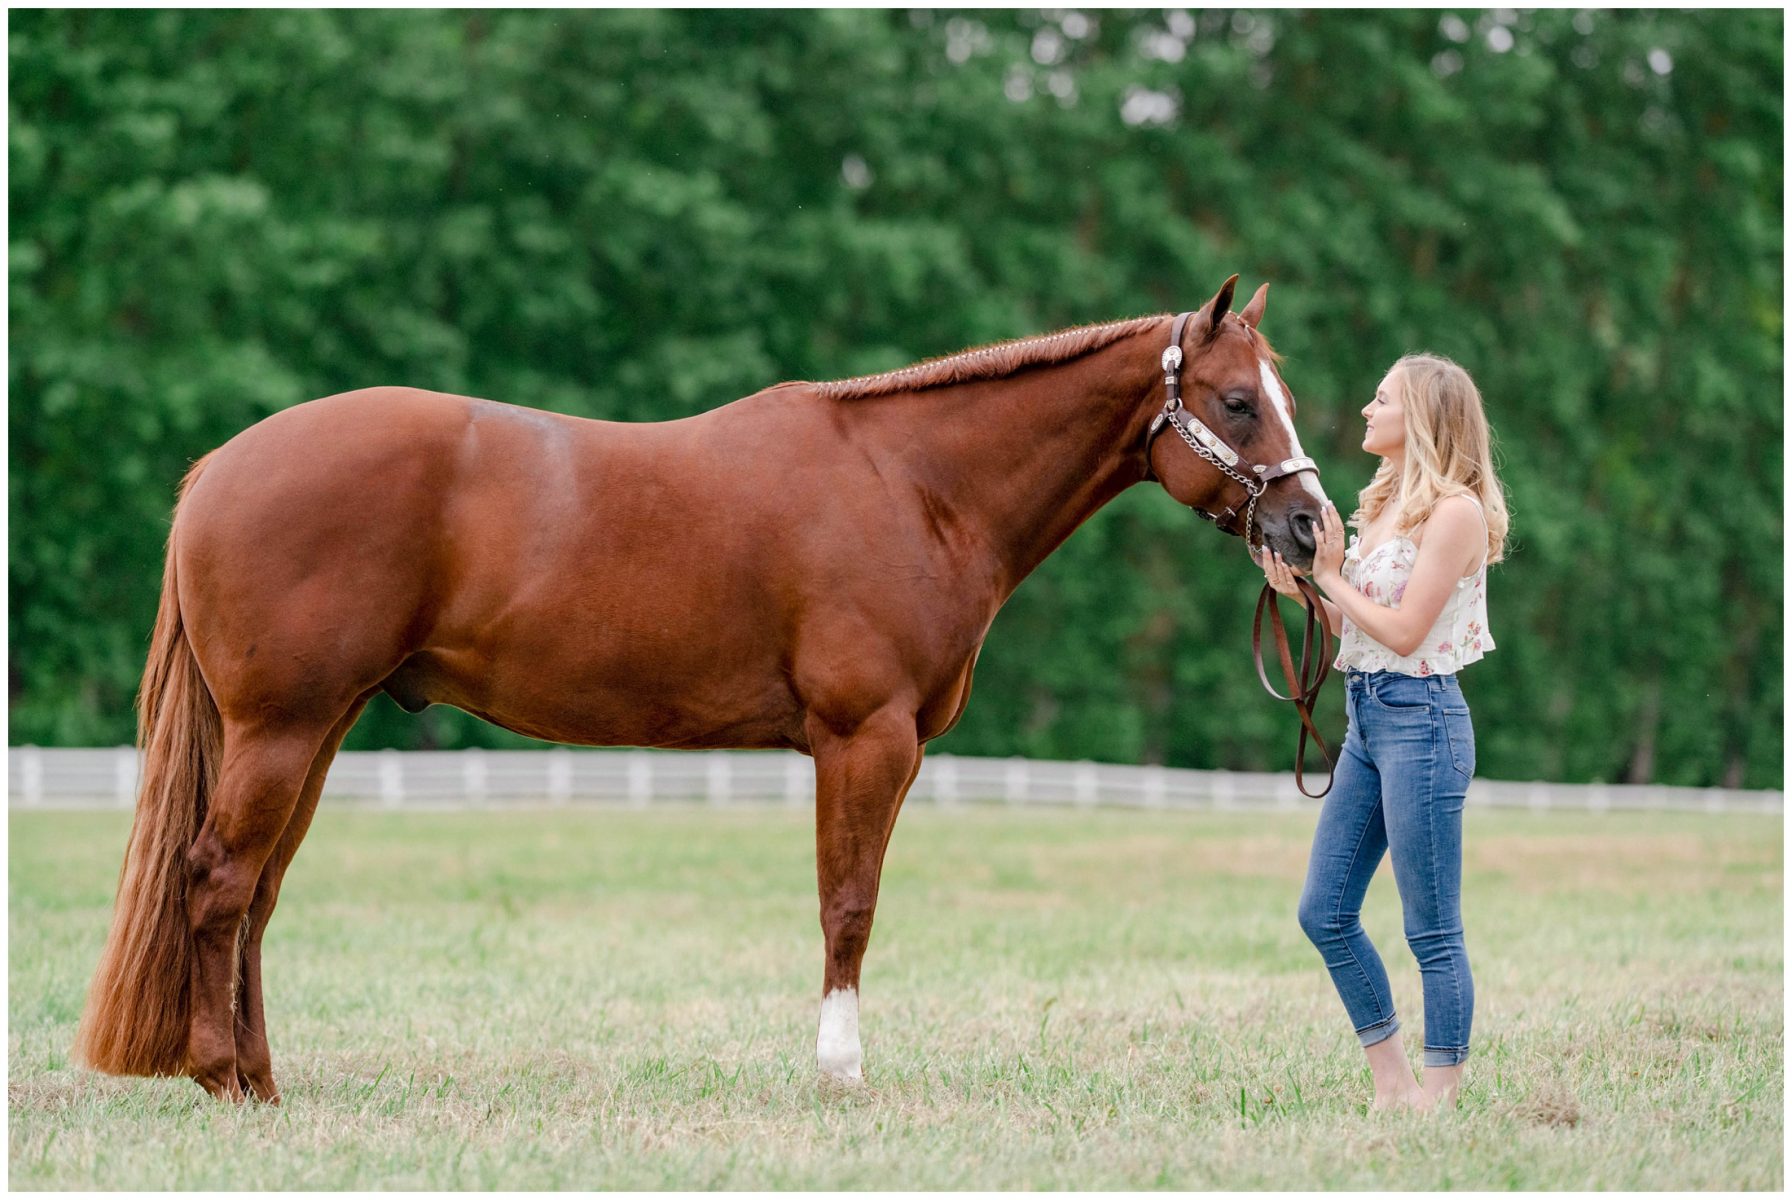 http://kirstiemarie.com/wp-content/uploads/2019/09/Jacqueline-Potwora-AQHYA-champion-The-Absolute-Best-McCulloch-Training-Stable-Equestrian-Kirstie-Marie-Photography_0009-1.jpg